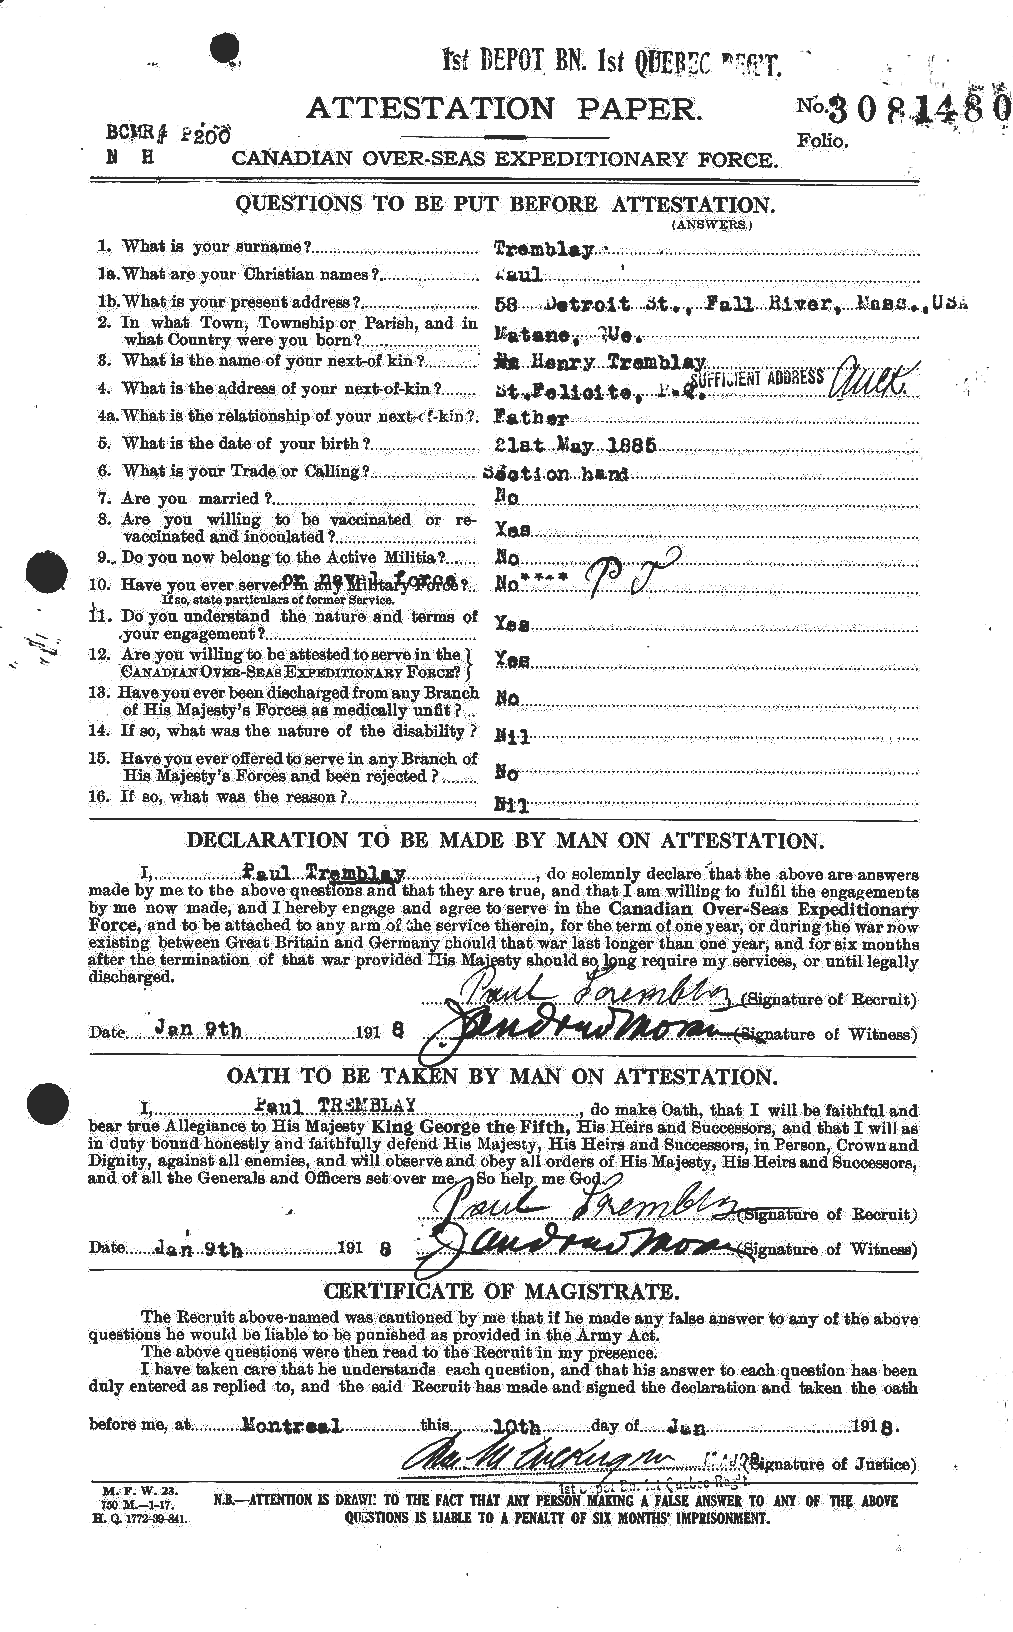 Personnel Records of the First World War - CEF 639228a